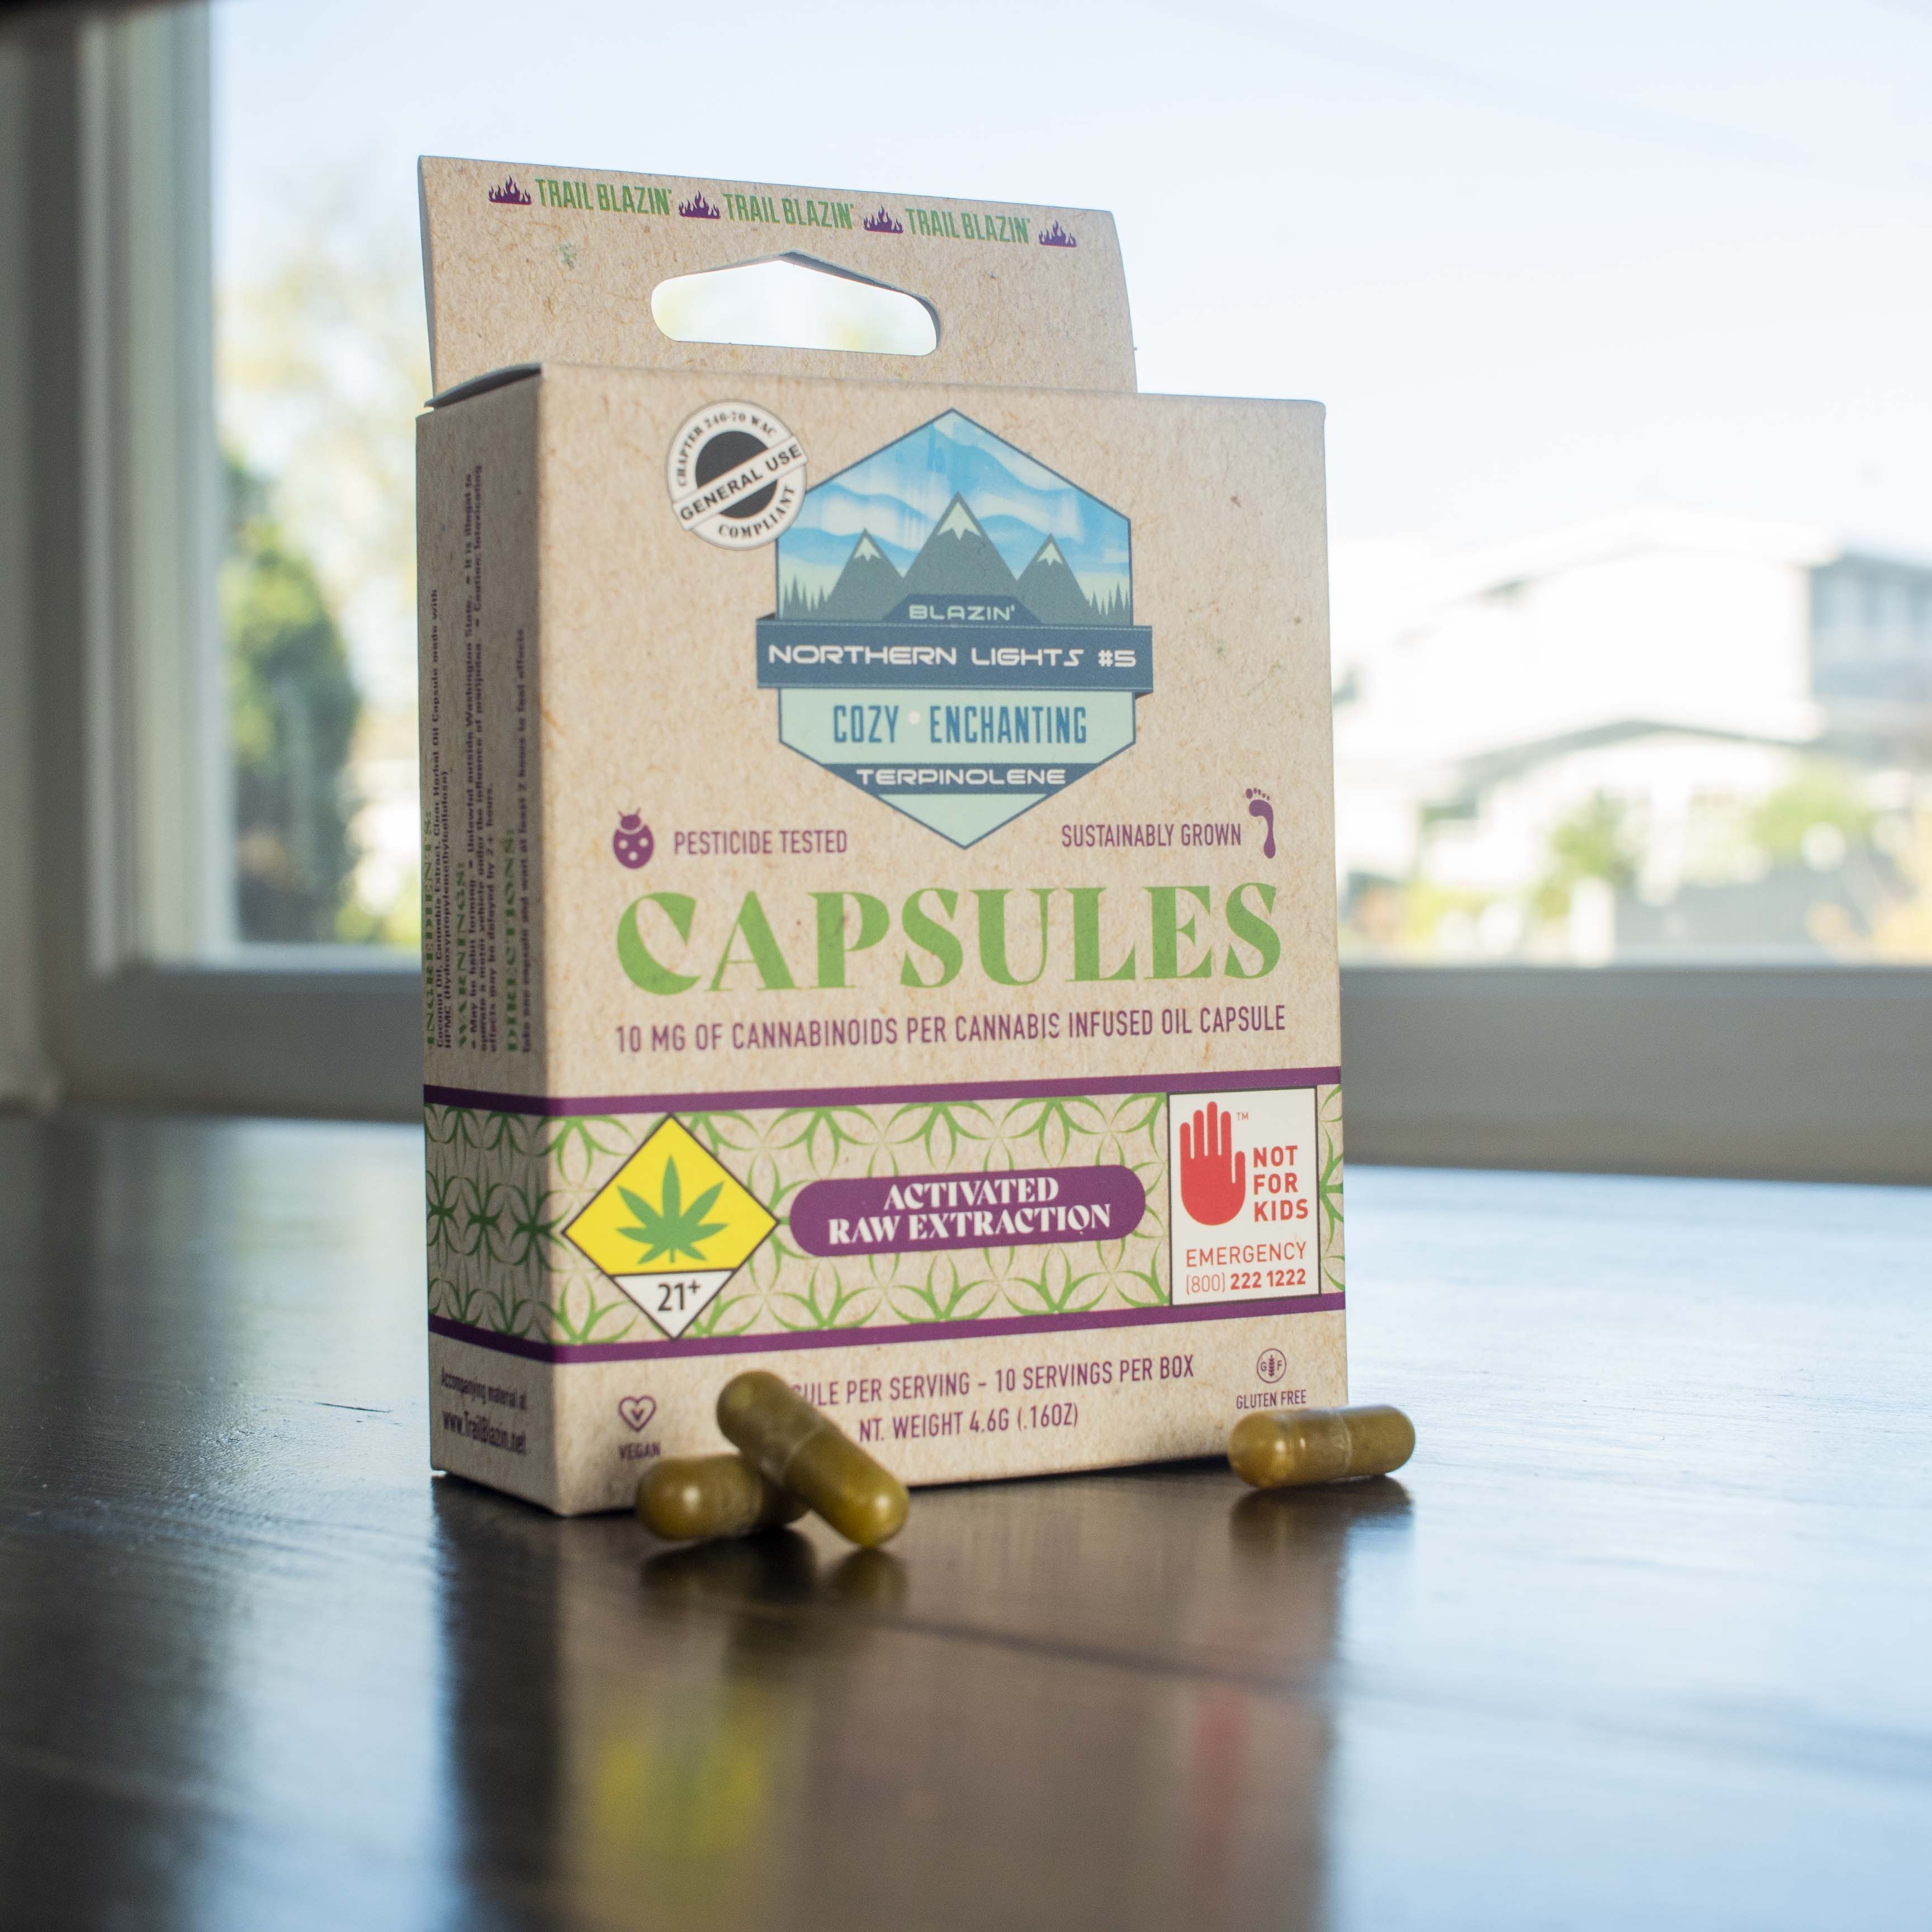 Northern Lights #5 capsule box with capsules.